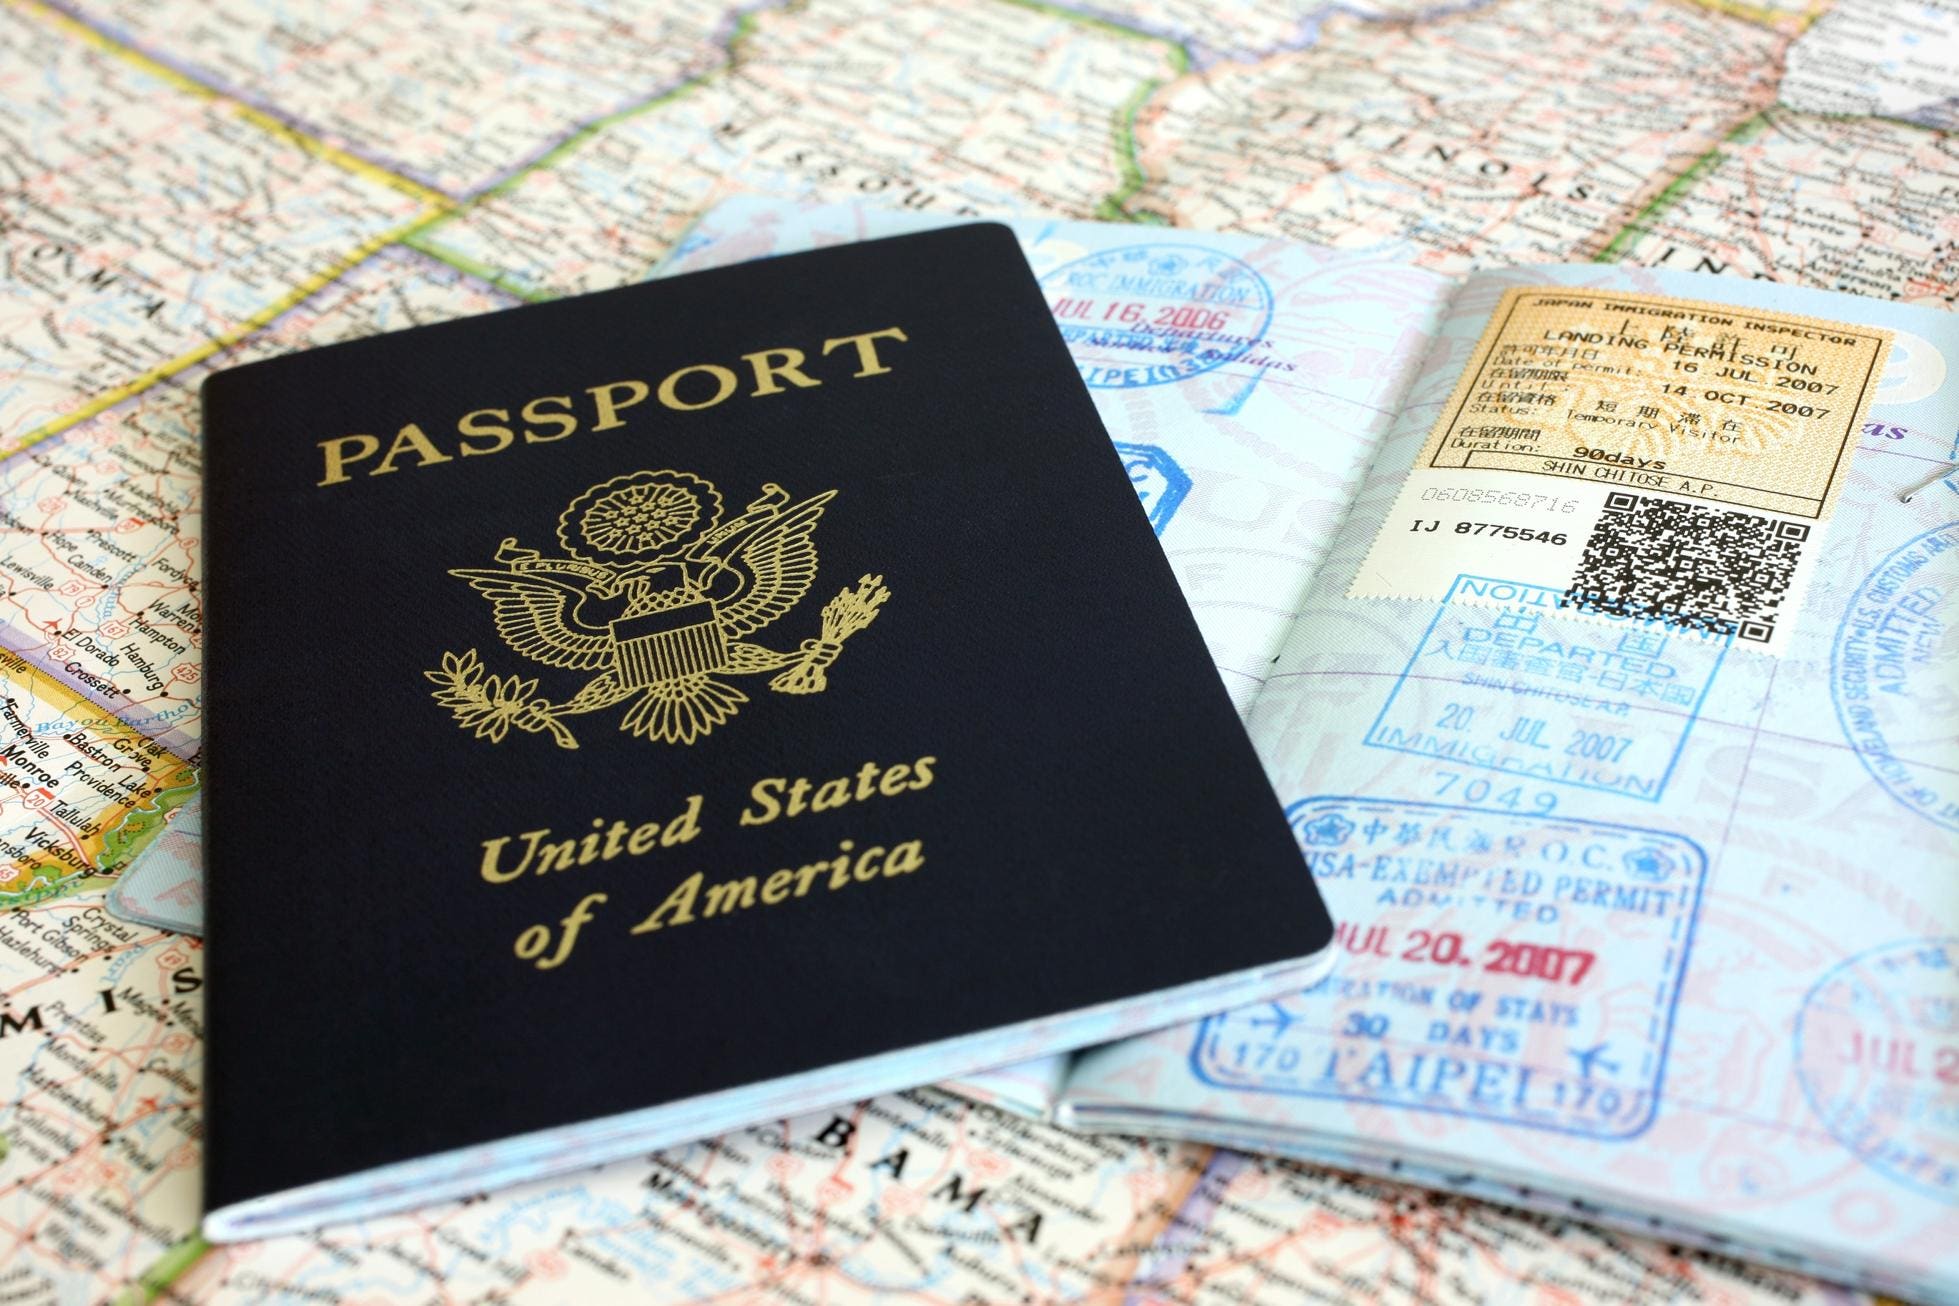 how soon can you renew a us passport